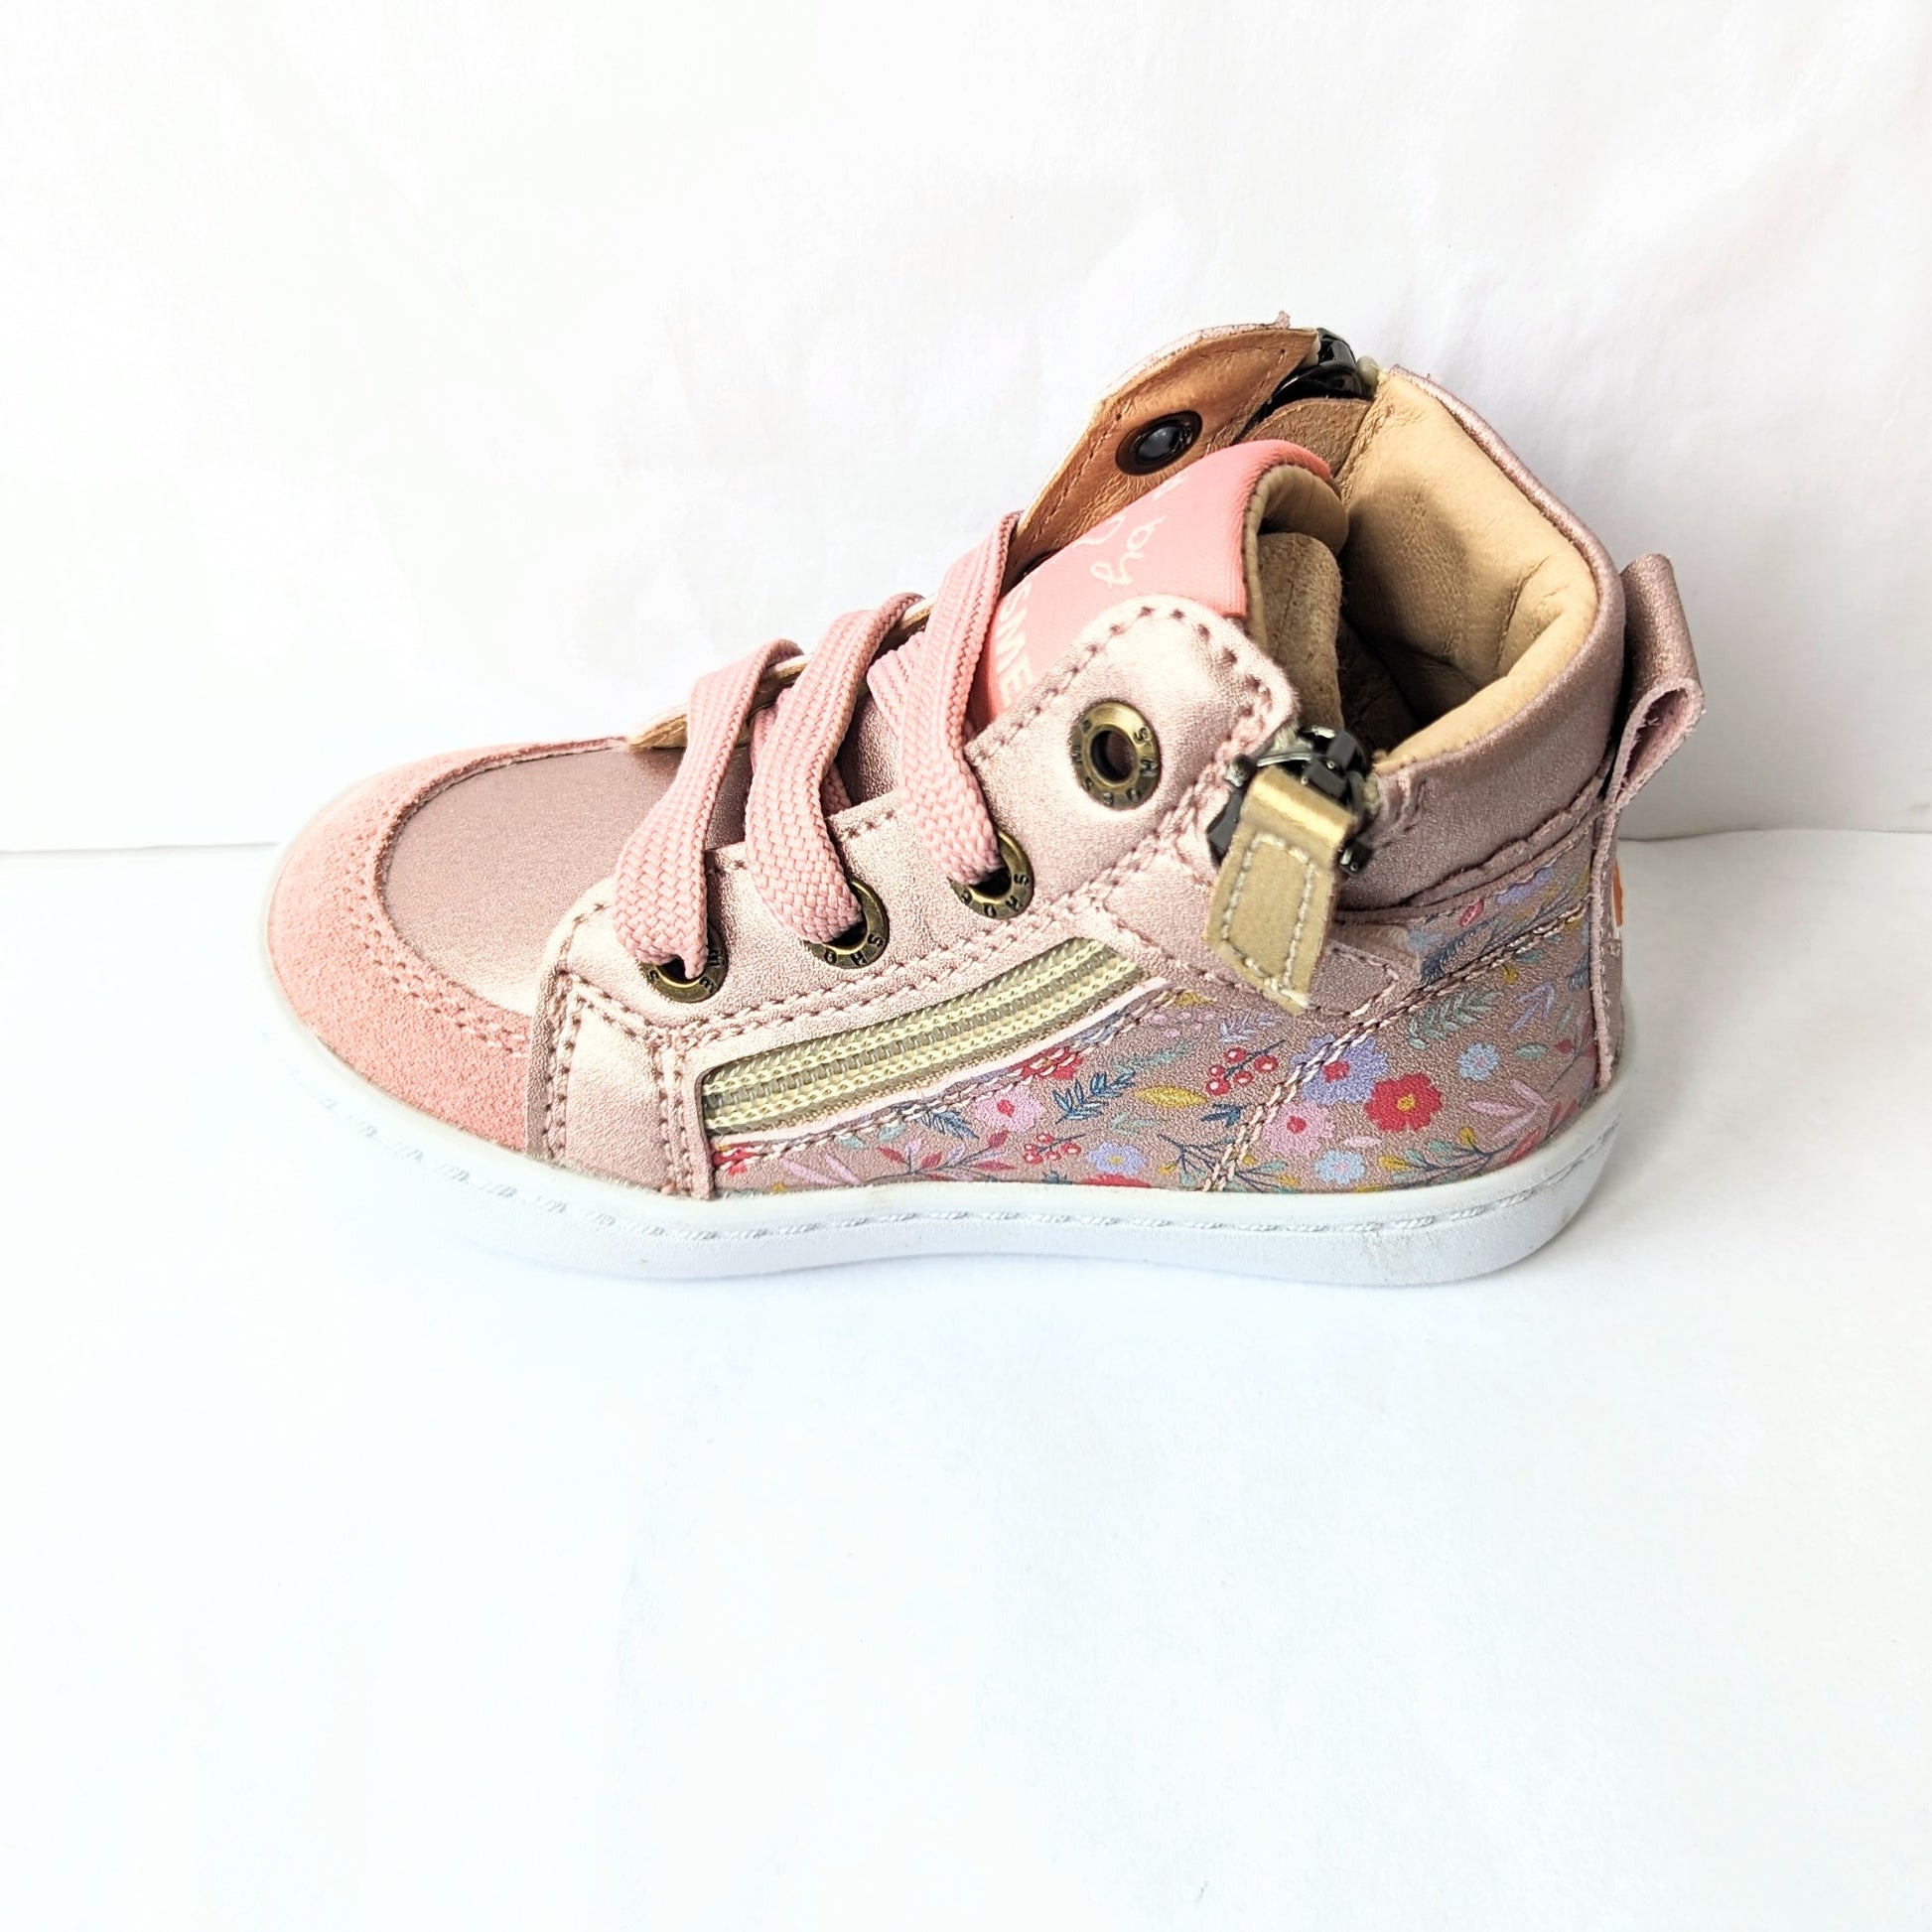 A girls hi-top boot by Shoesme, style FL23W008-B, in rose gold floral leather and suede with detachable teddy bear and lace and zip fastening. Left side view.